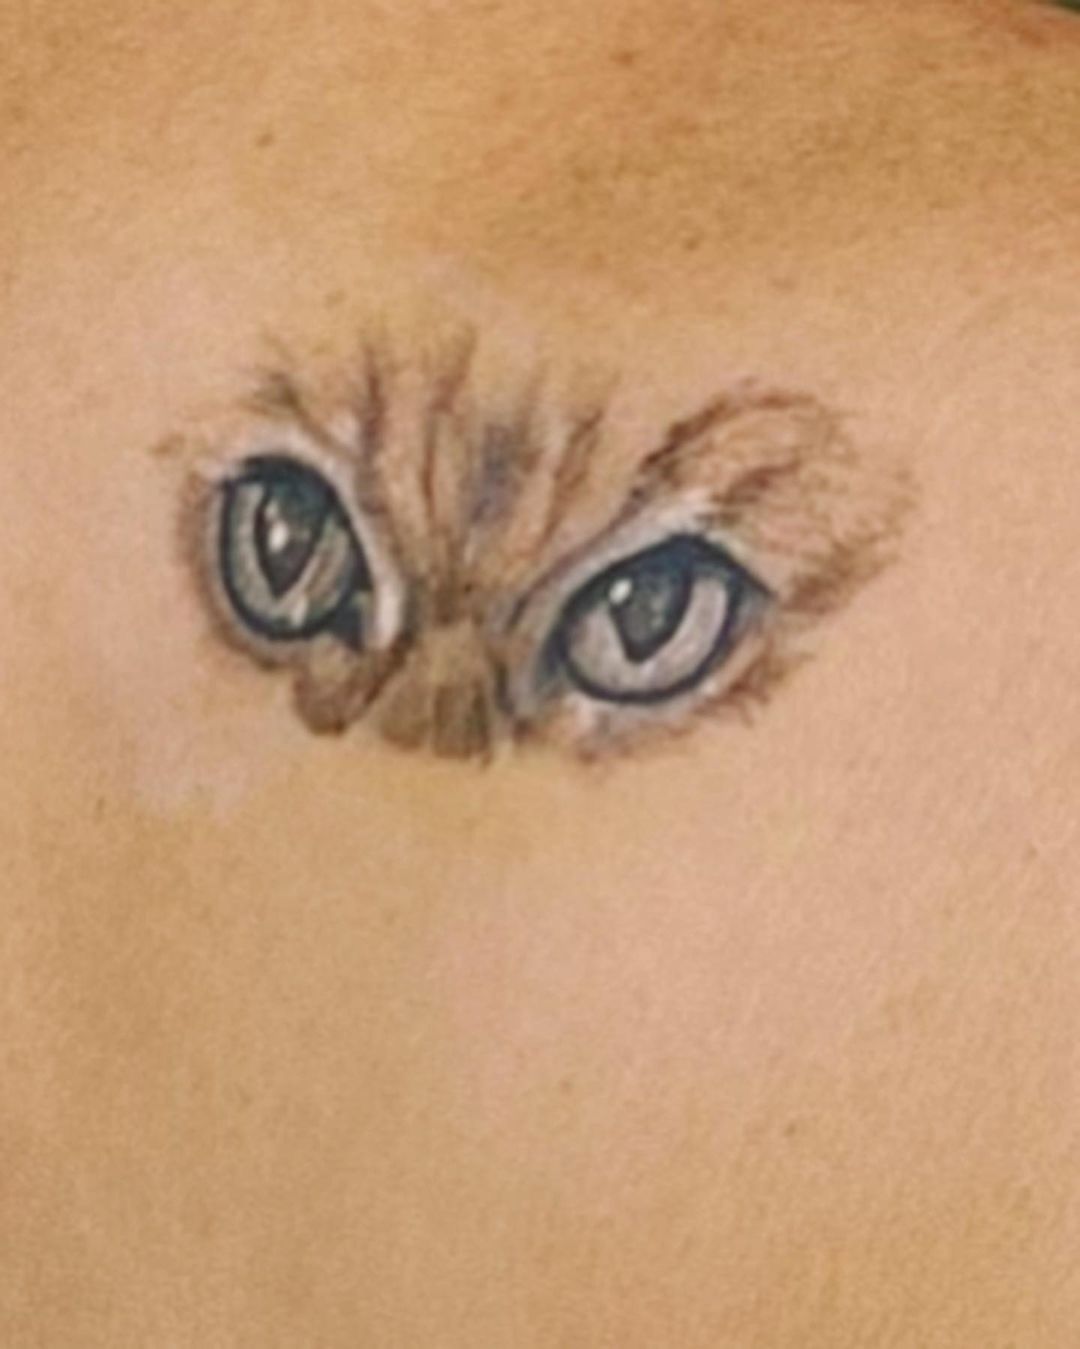 Tattoo of a cat's face